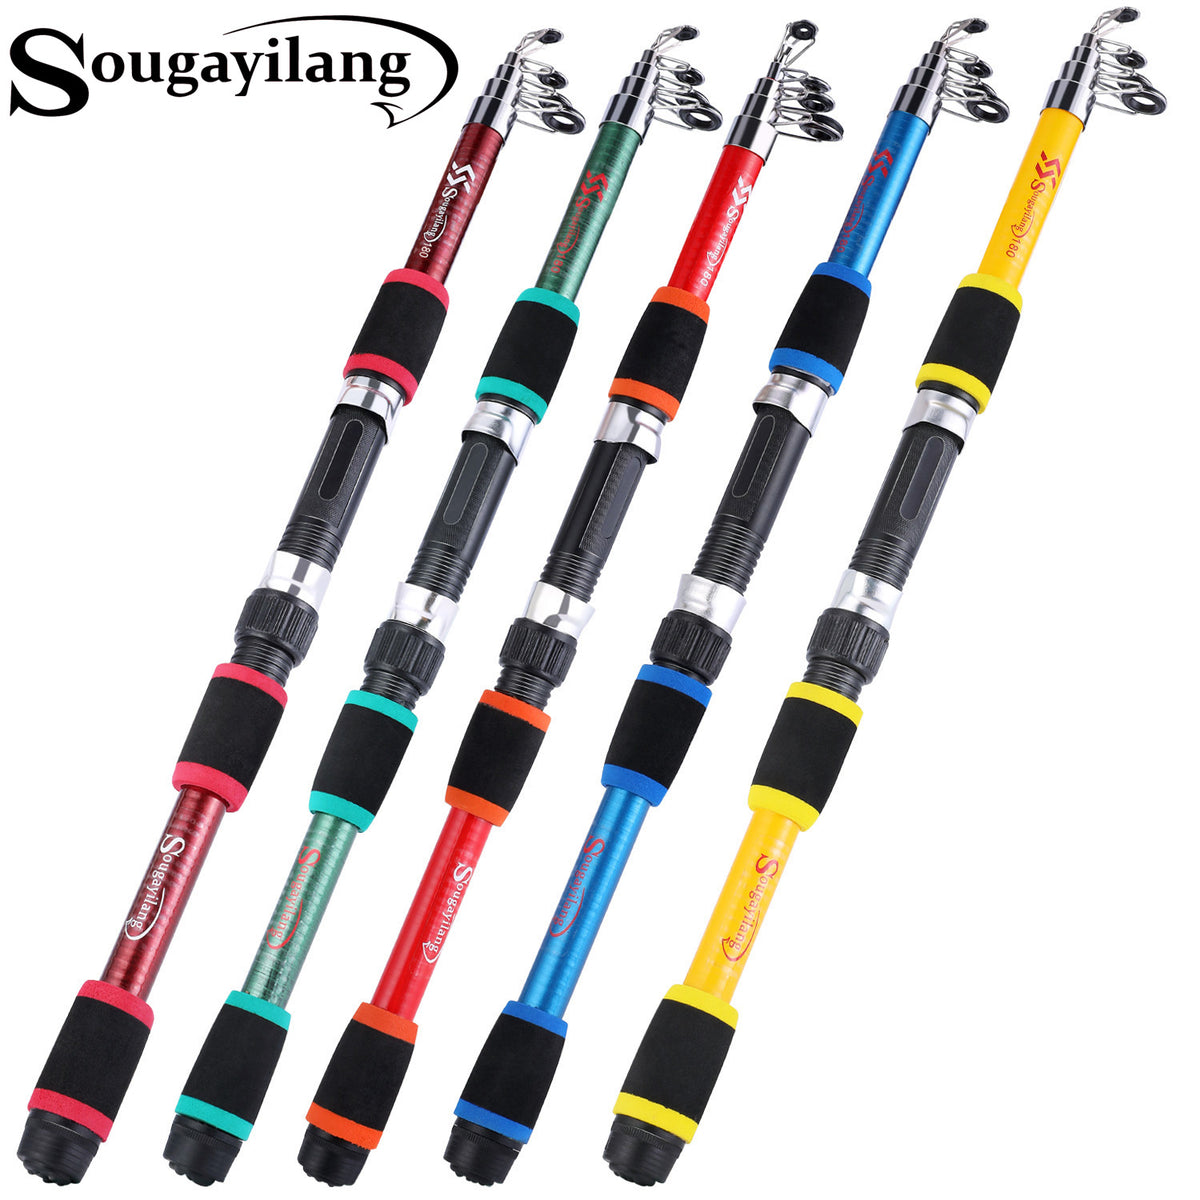 2.1M fishing rod with reel high carbon spinning rod portable telescopic trout  rods and spinning reels set lure pole pesca